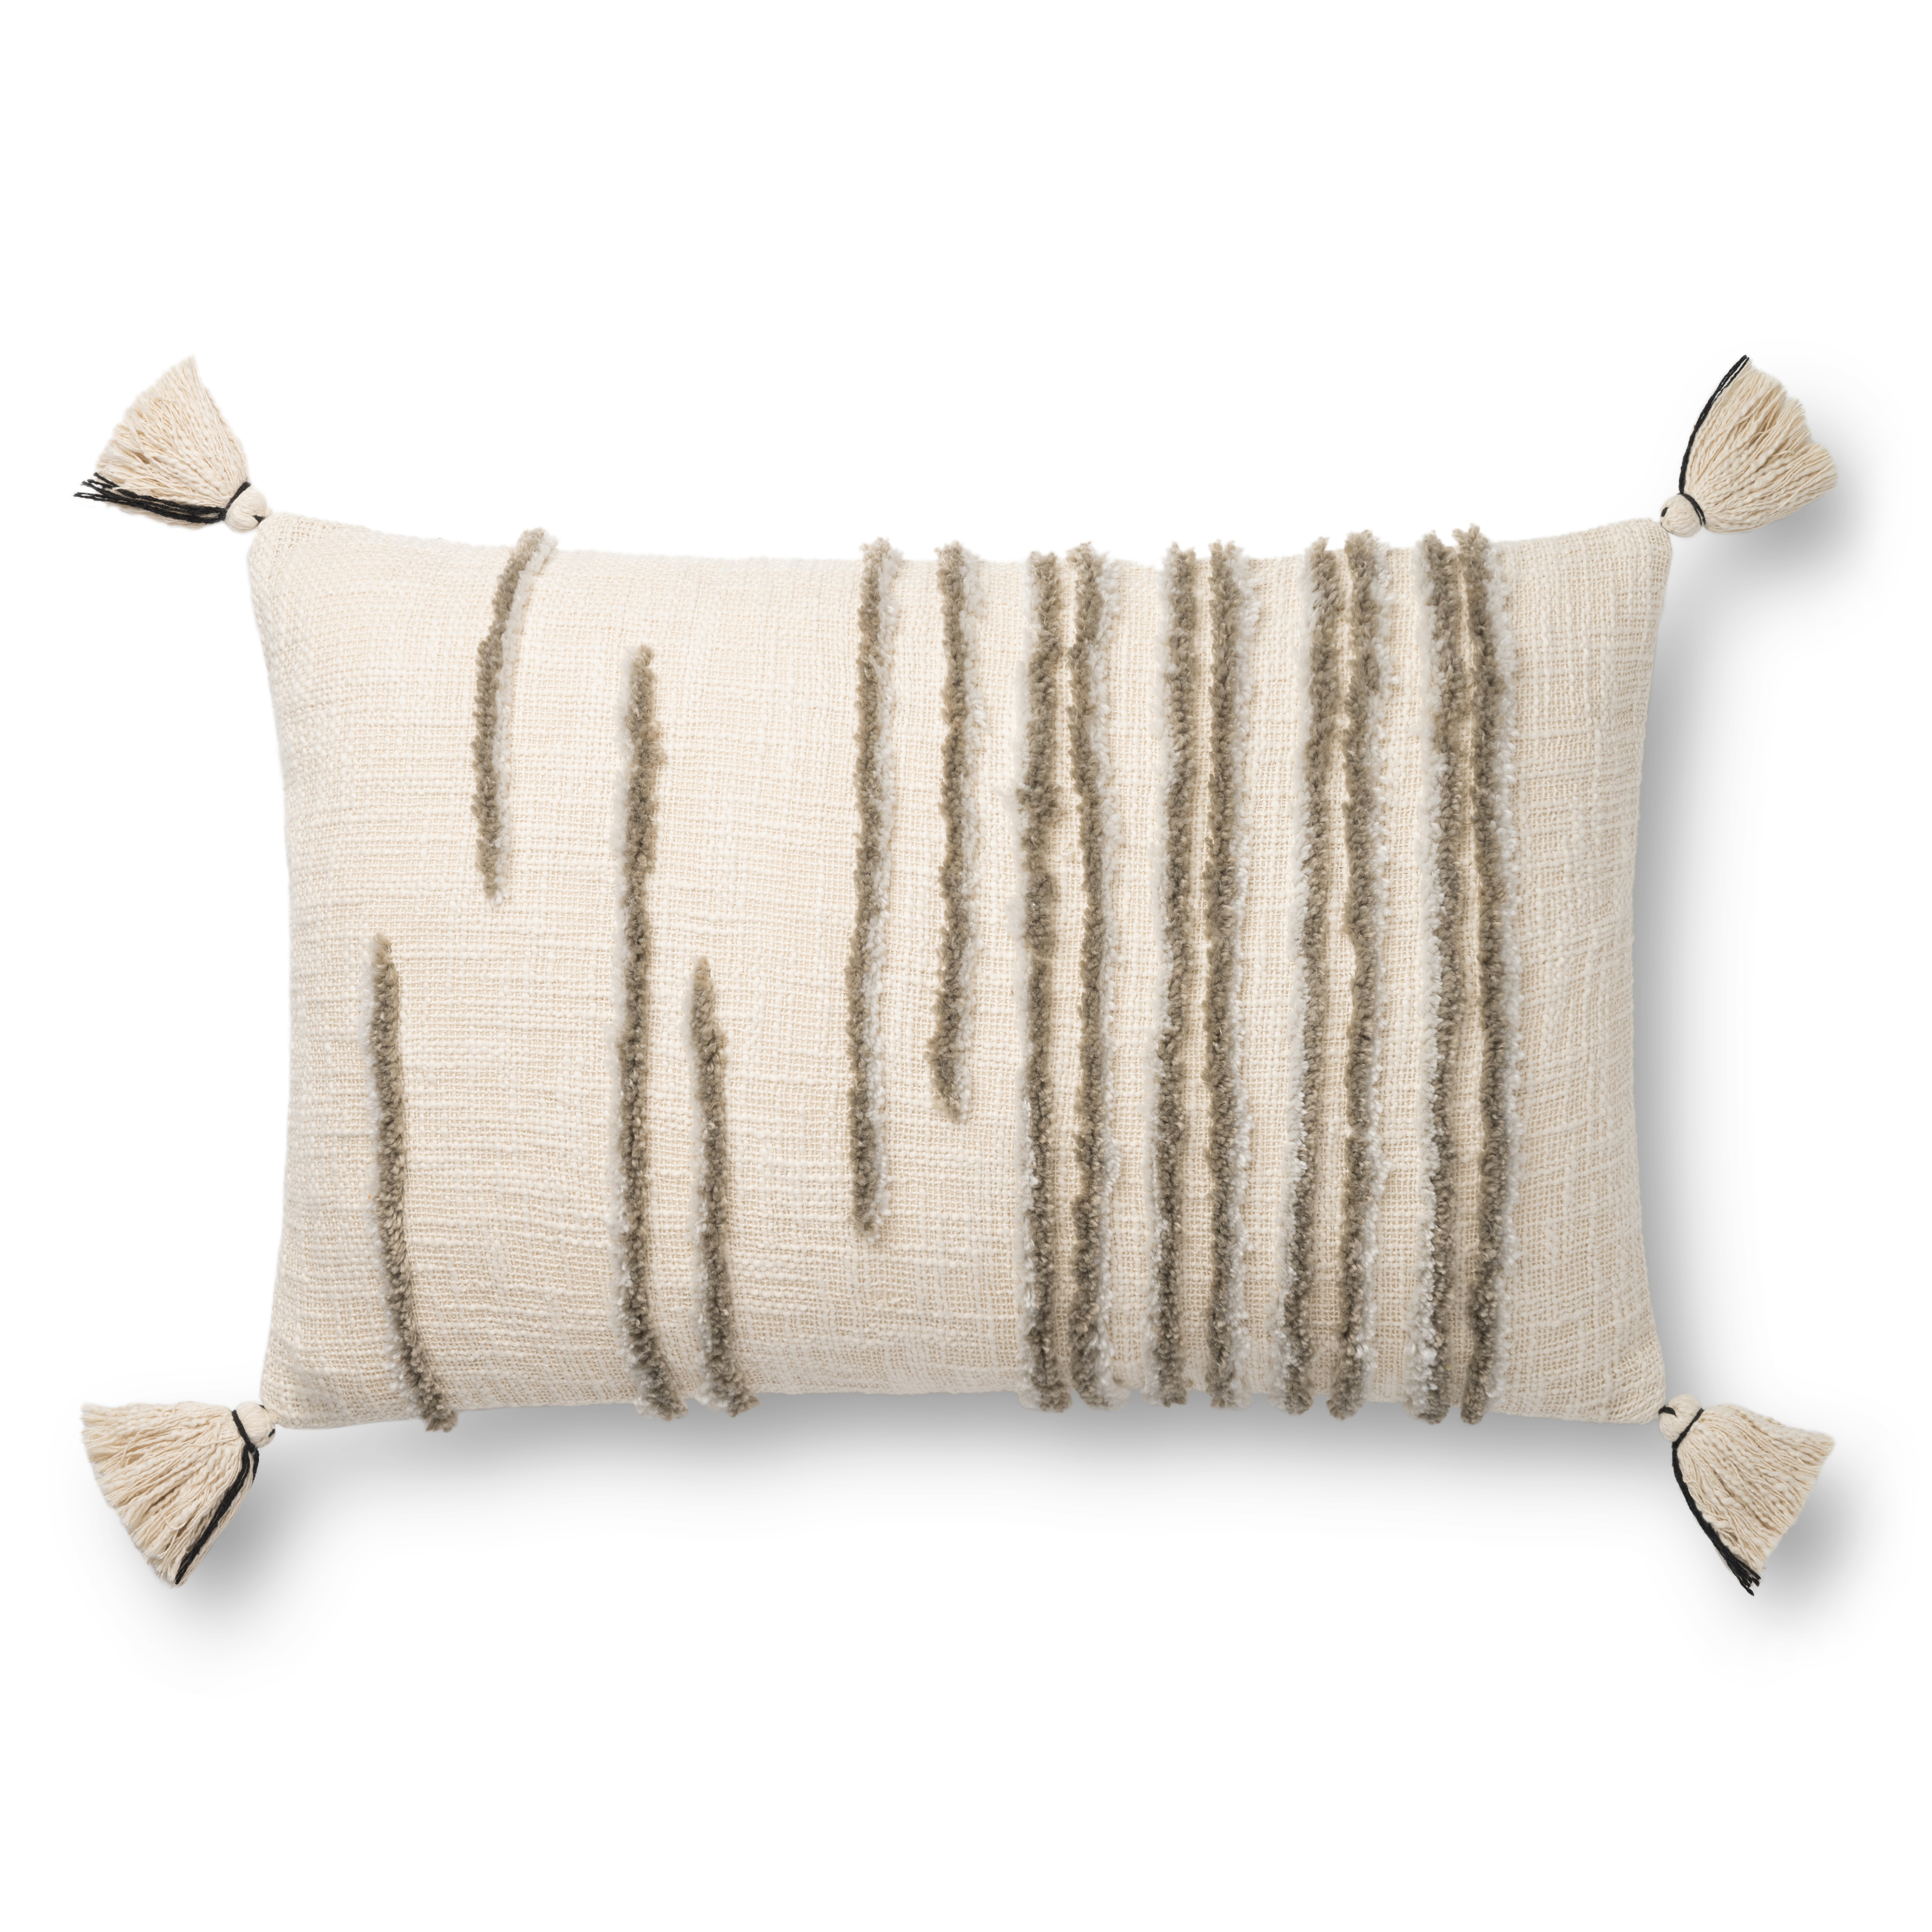 Loloi Pillows P0832 Natural / Stone 22" x 22" Cover Only - Loloi Rugs